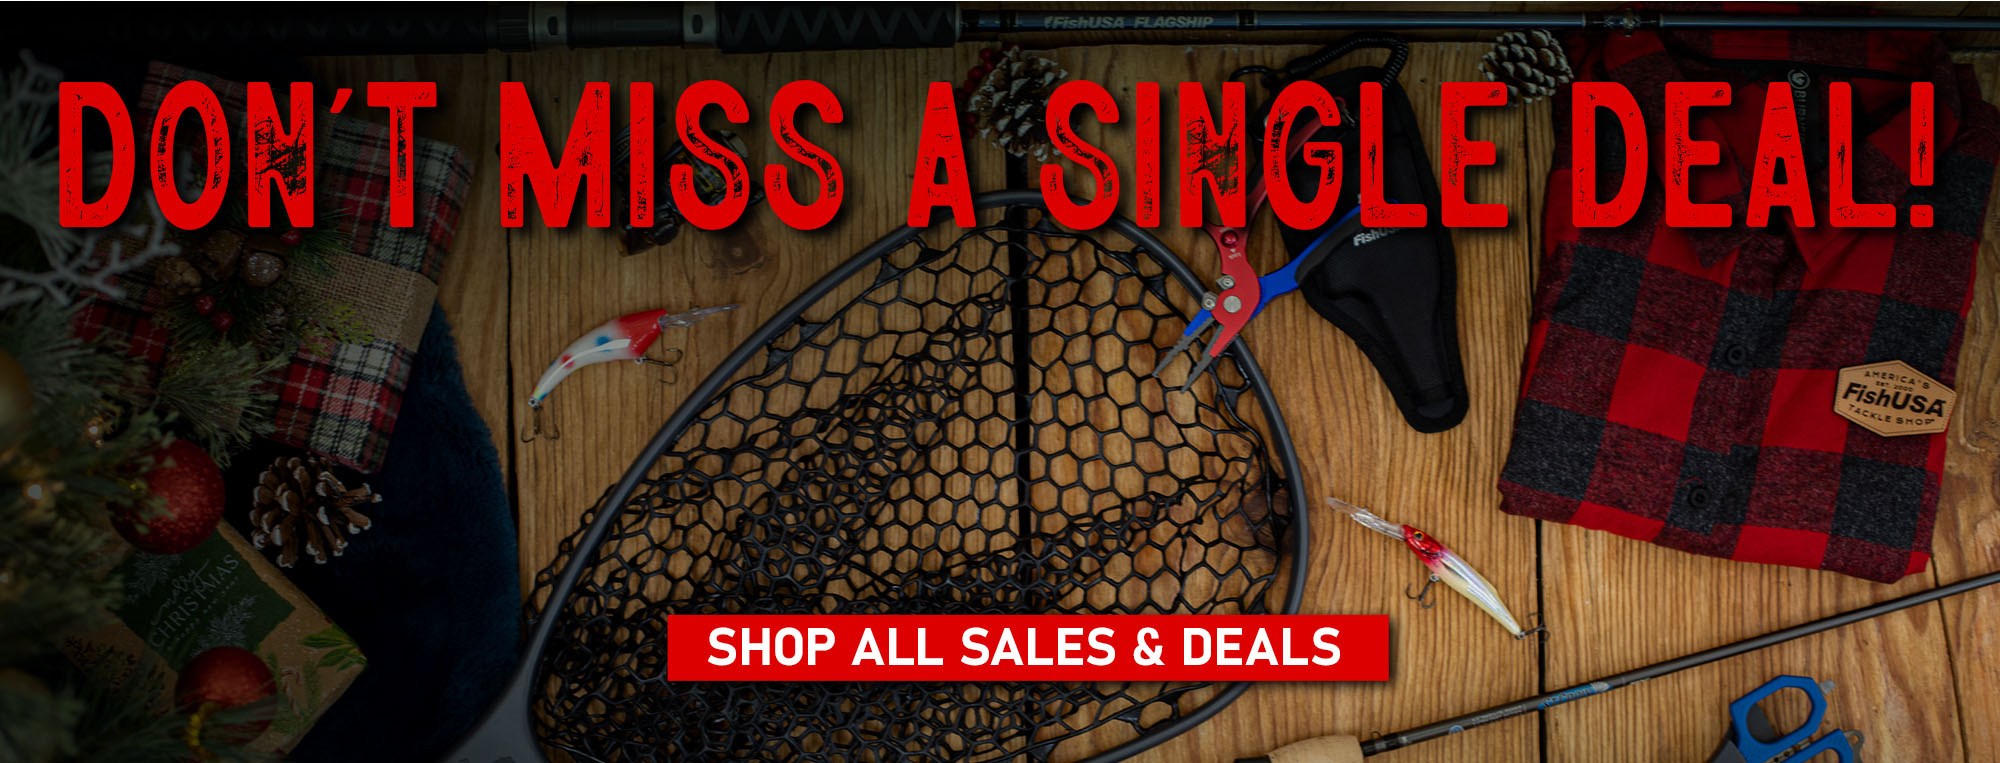 Don't Miss A single Deal!